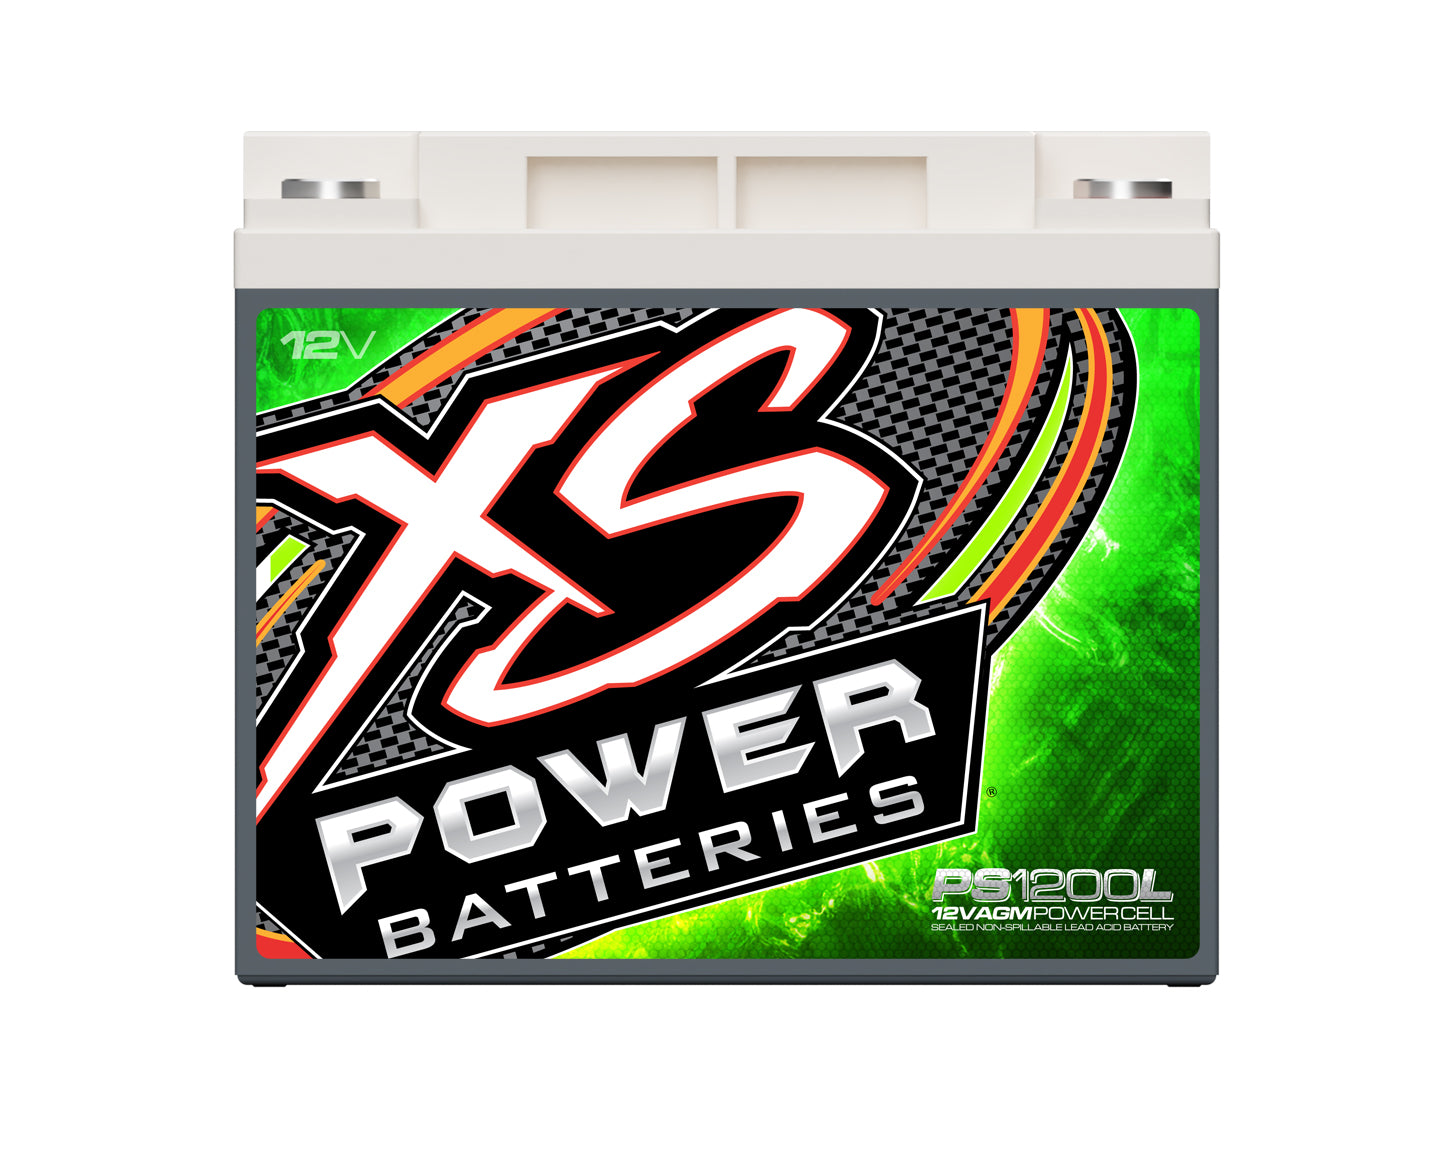 PS1200L XS Power 12VDC AGM Powersports Vehicle Battery 2600A 55Ah